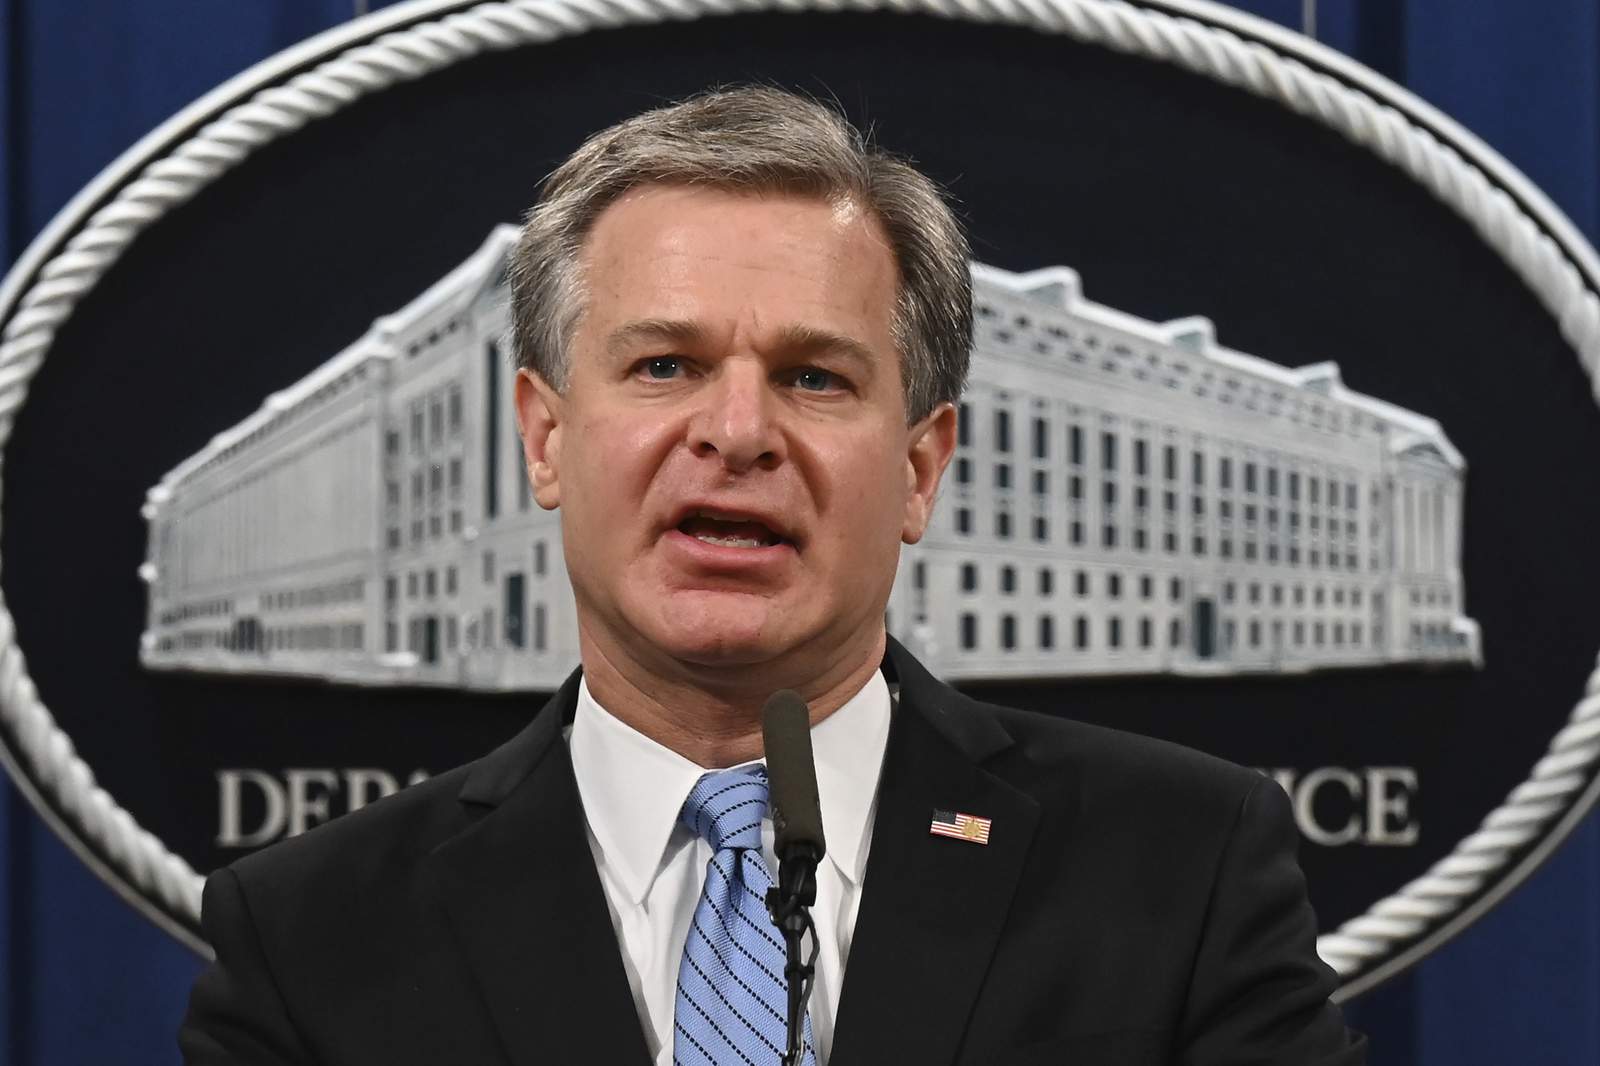 Job on the line, Wray threads needle on controversial issues